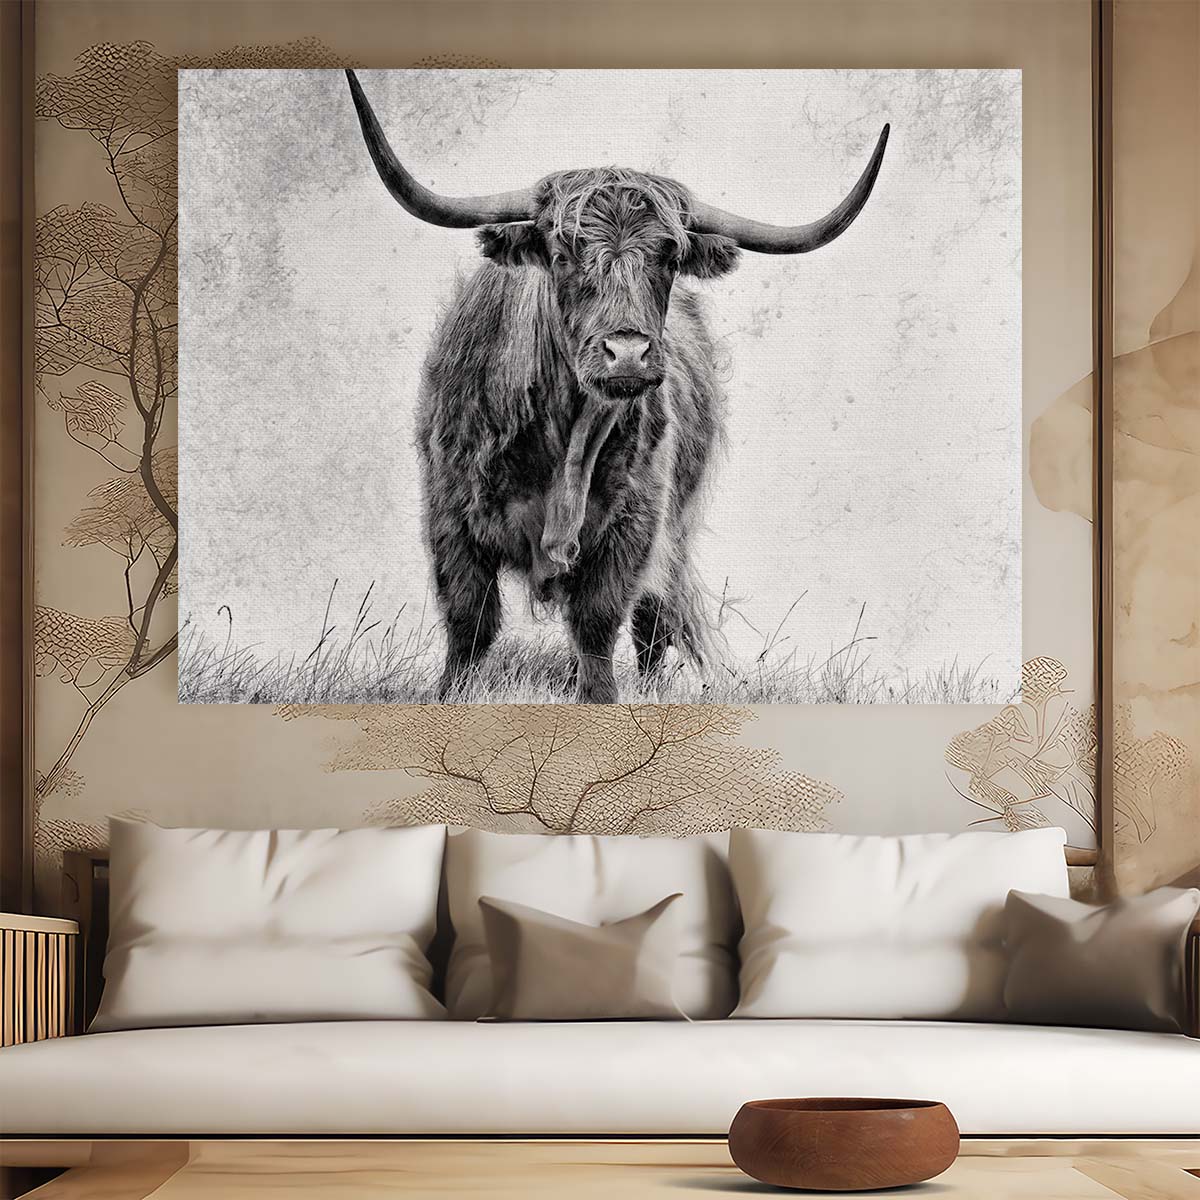 Monochrome Highland Cow in Countryside Field Wall Art by Luxuriance Designs. Made in USA.